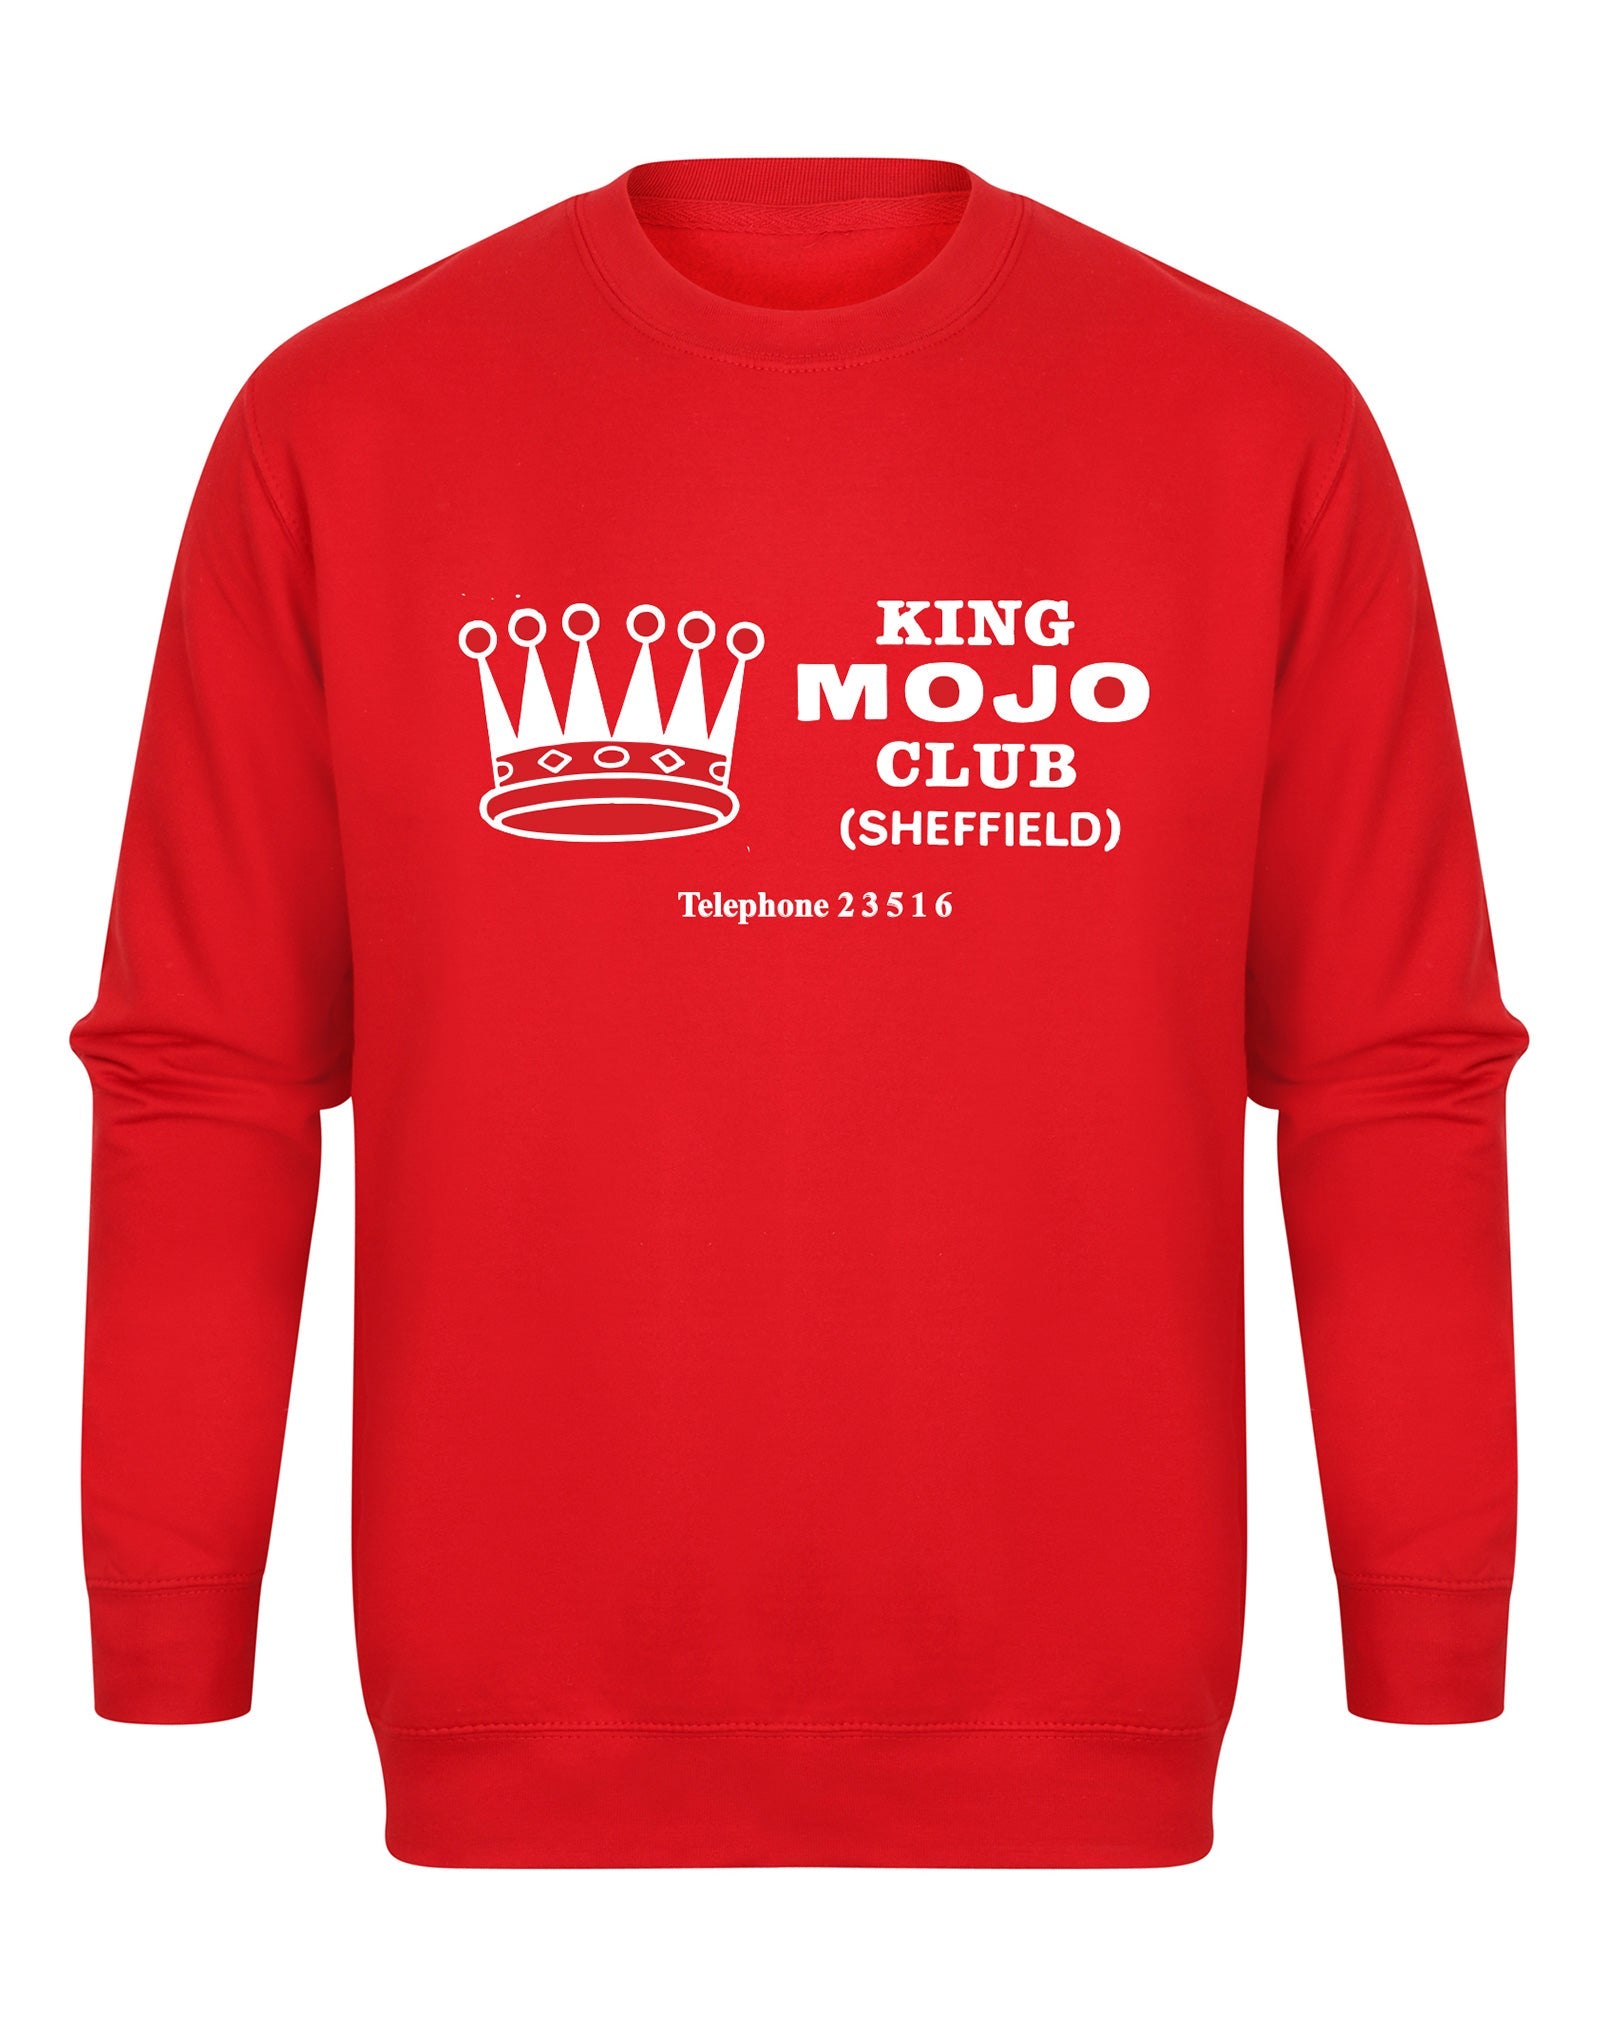 King Mojo unisex fit sweatshirt - various colours - Dirty Stop Outs